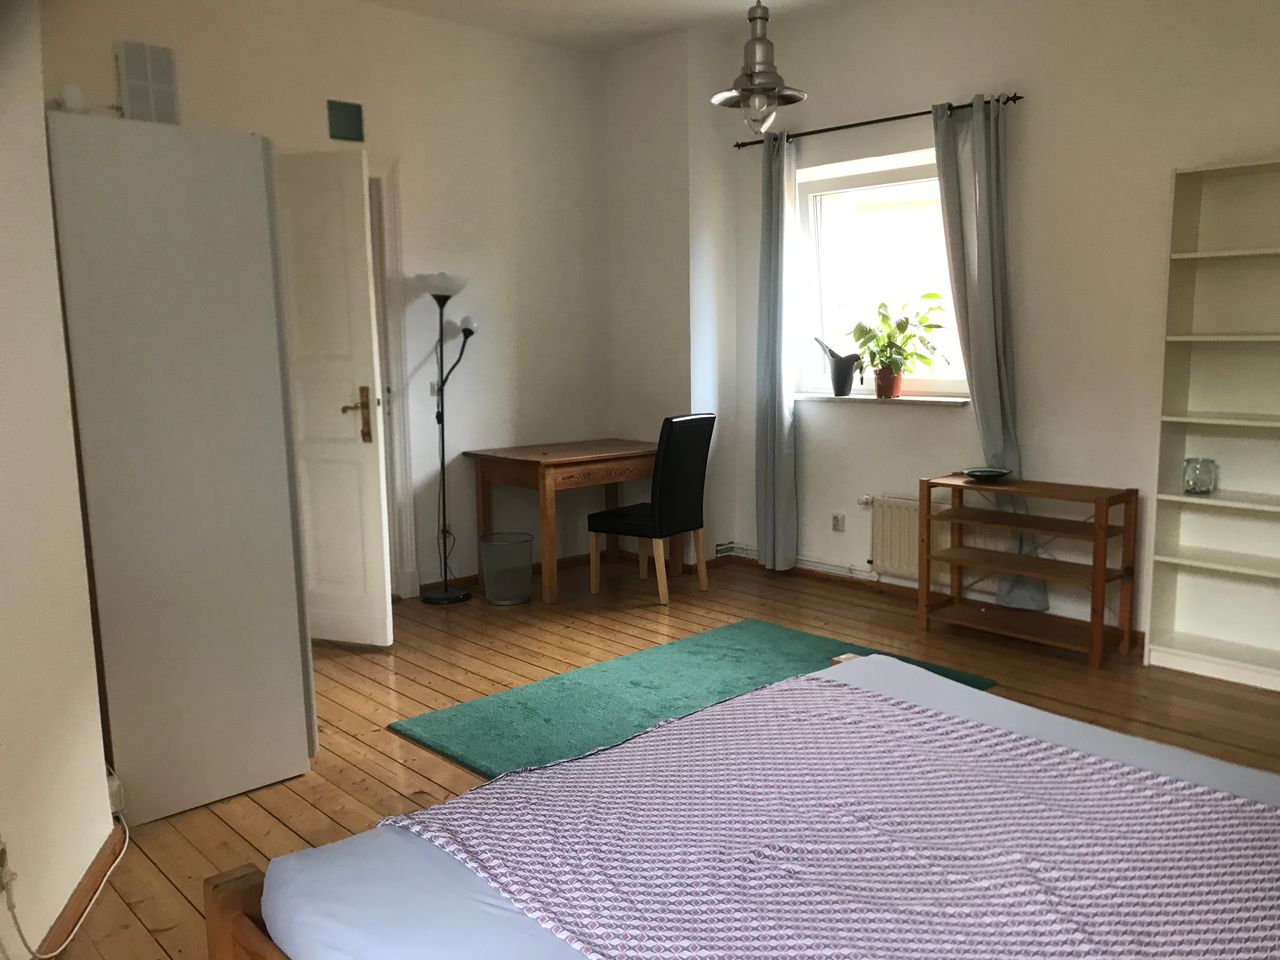 Central, sunny and gorgeous studio located in Friedrichshain